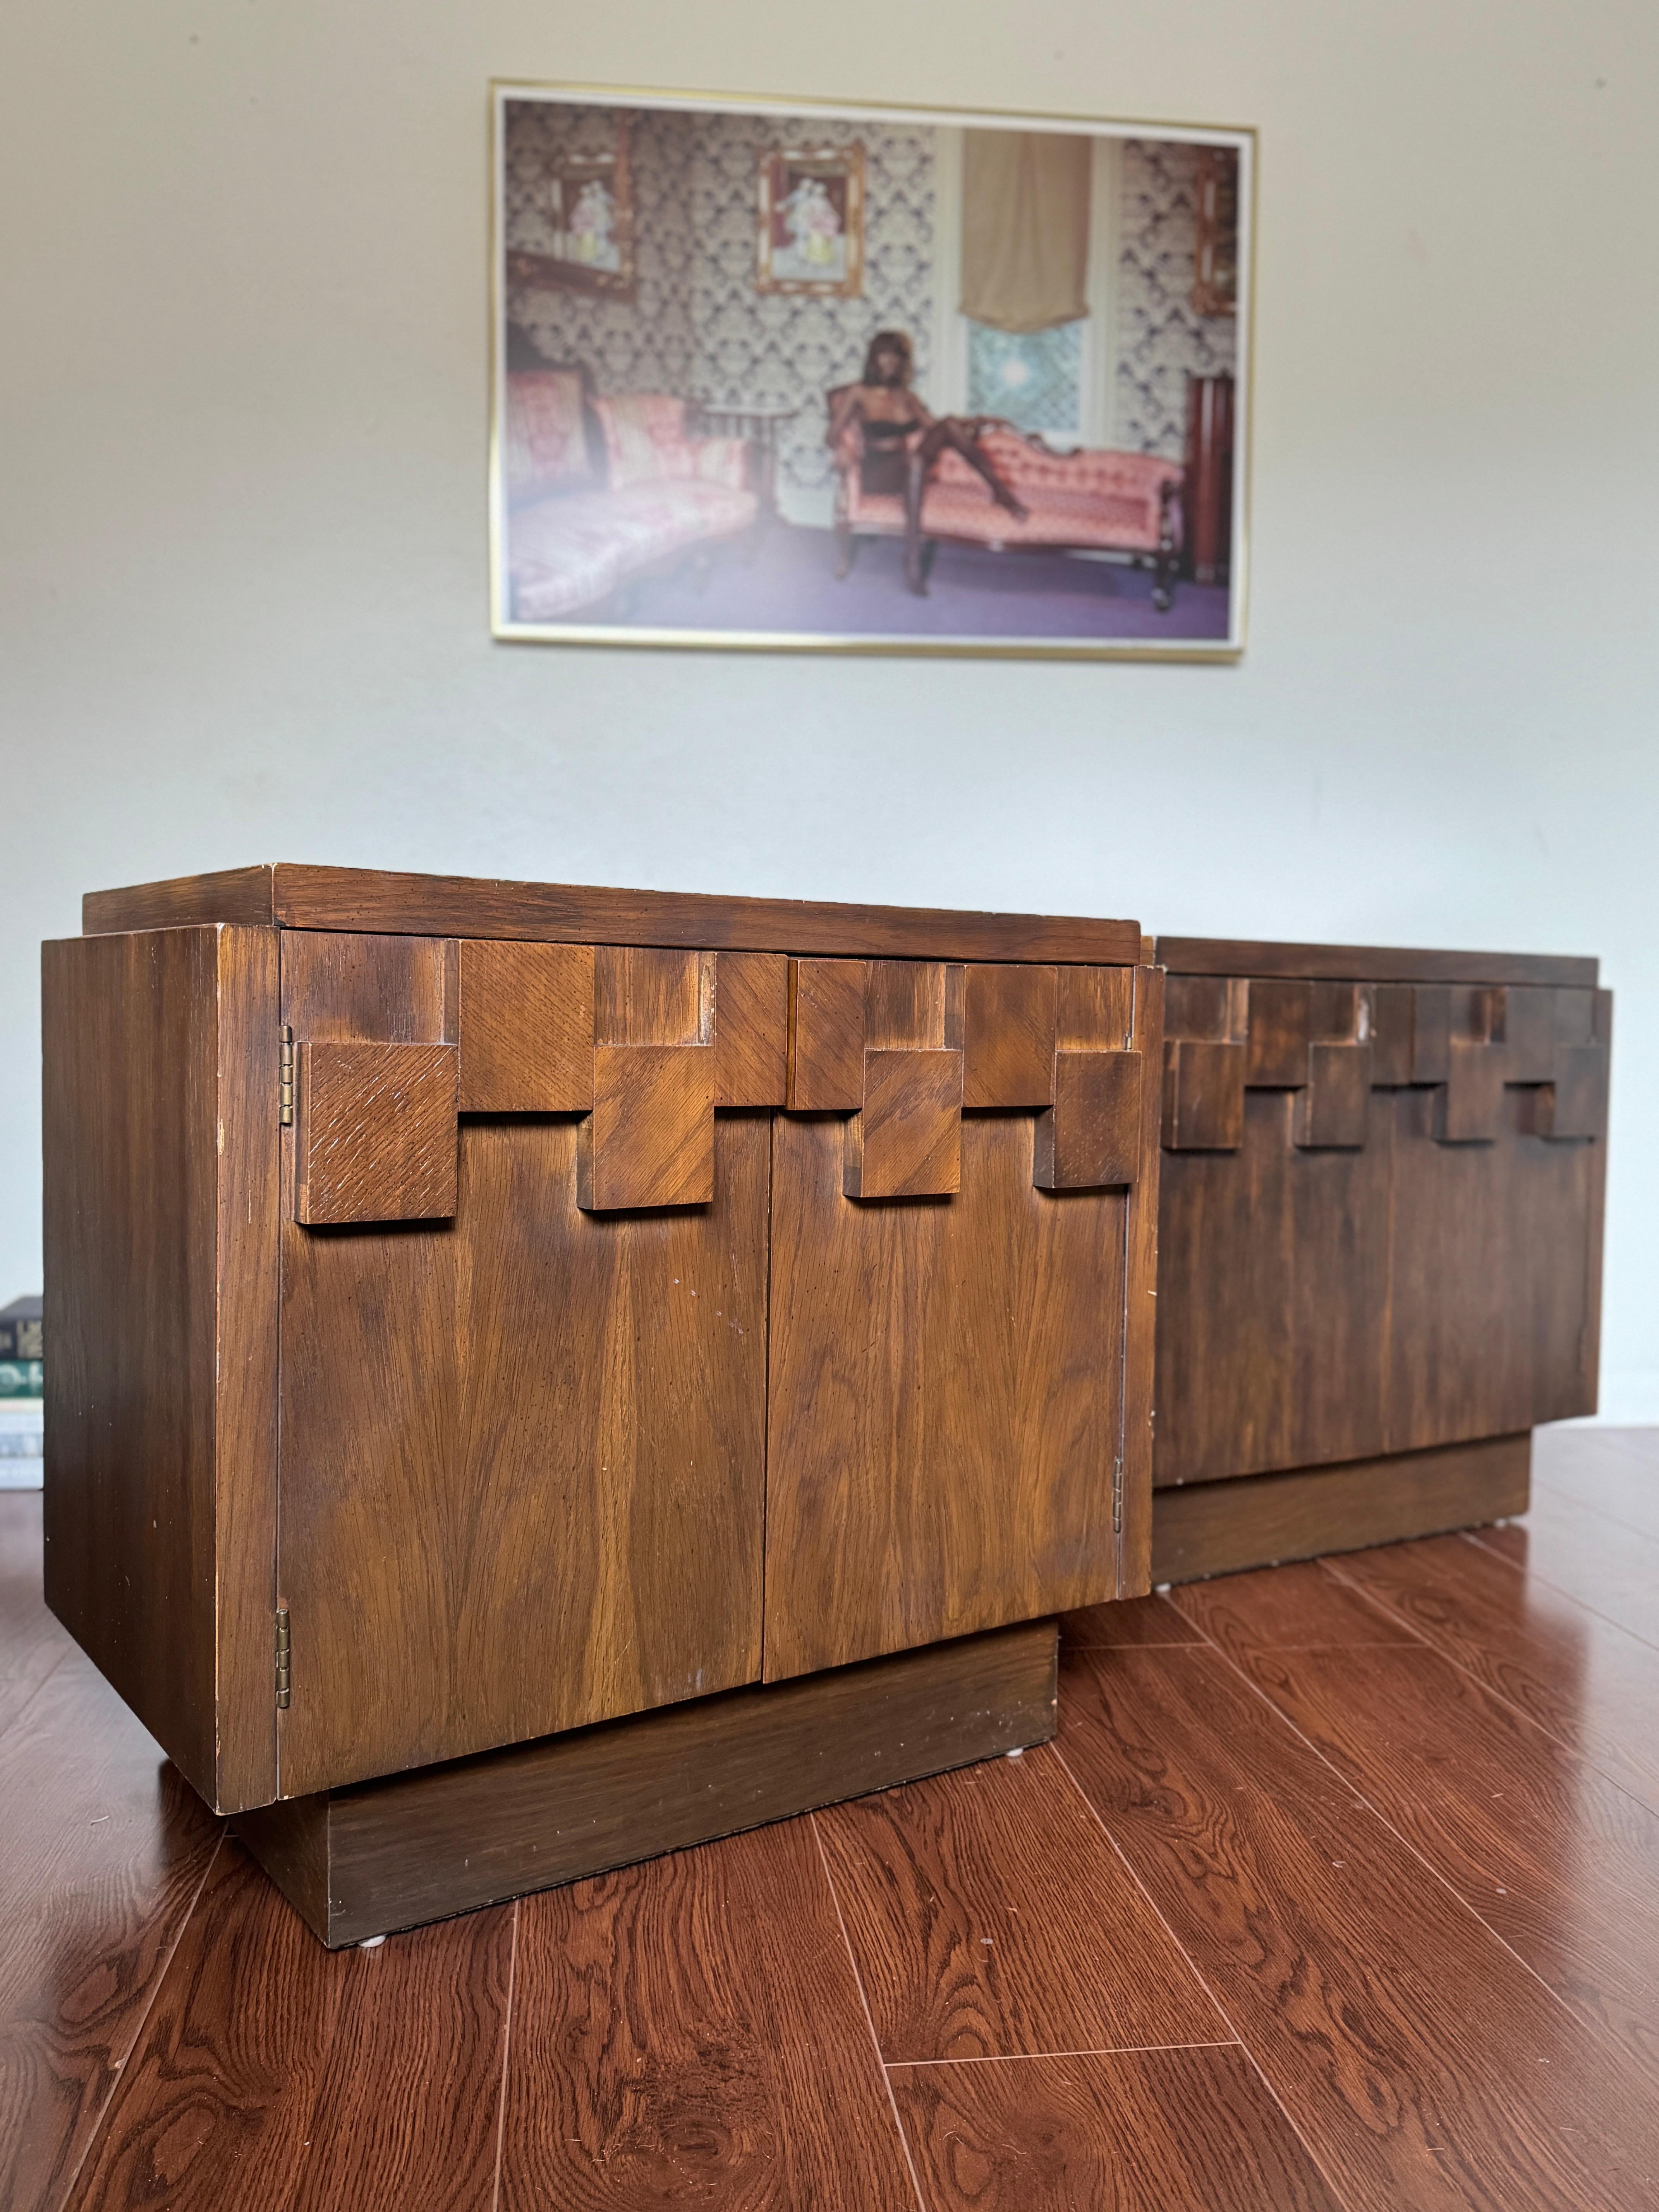 A set of vintage mid century modern nighstands by Lane Furniture, circa 1970s. Styled after designer Paul Evans, these nightstands feature an iconic brutalist style with a heavy oak wood mosaic on the front doors, plinth base, and interior shelving.